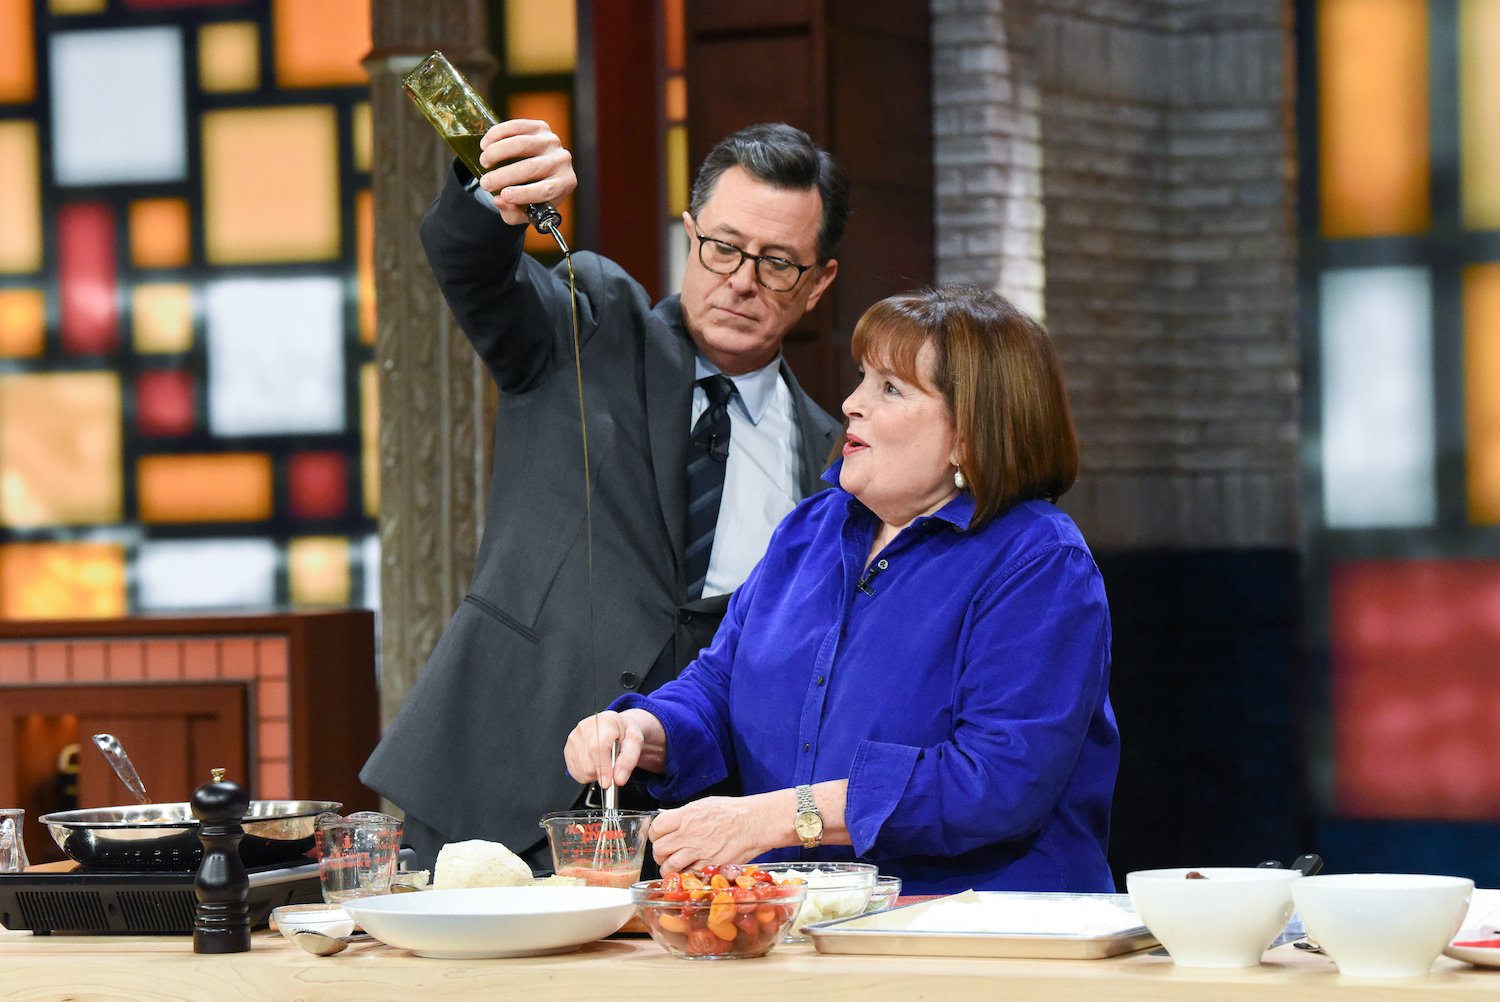 Ina Garten wears a bright blue shirt and cooks with Stephen Colbert who is seen drizzling oil